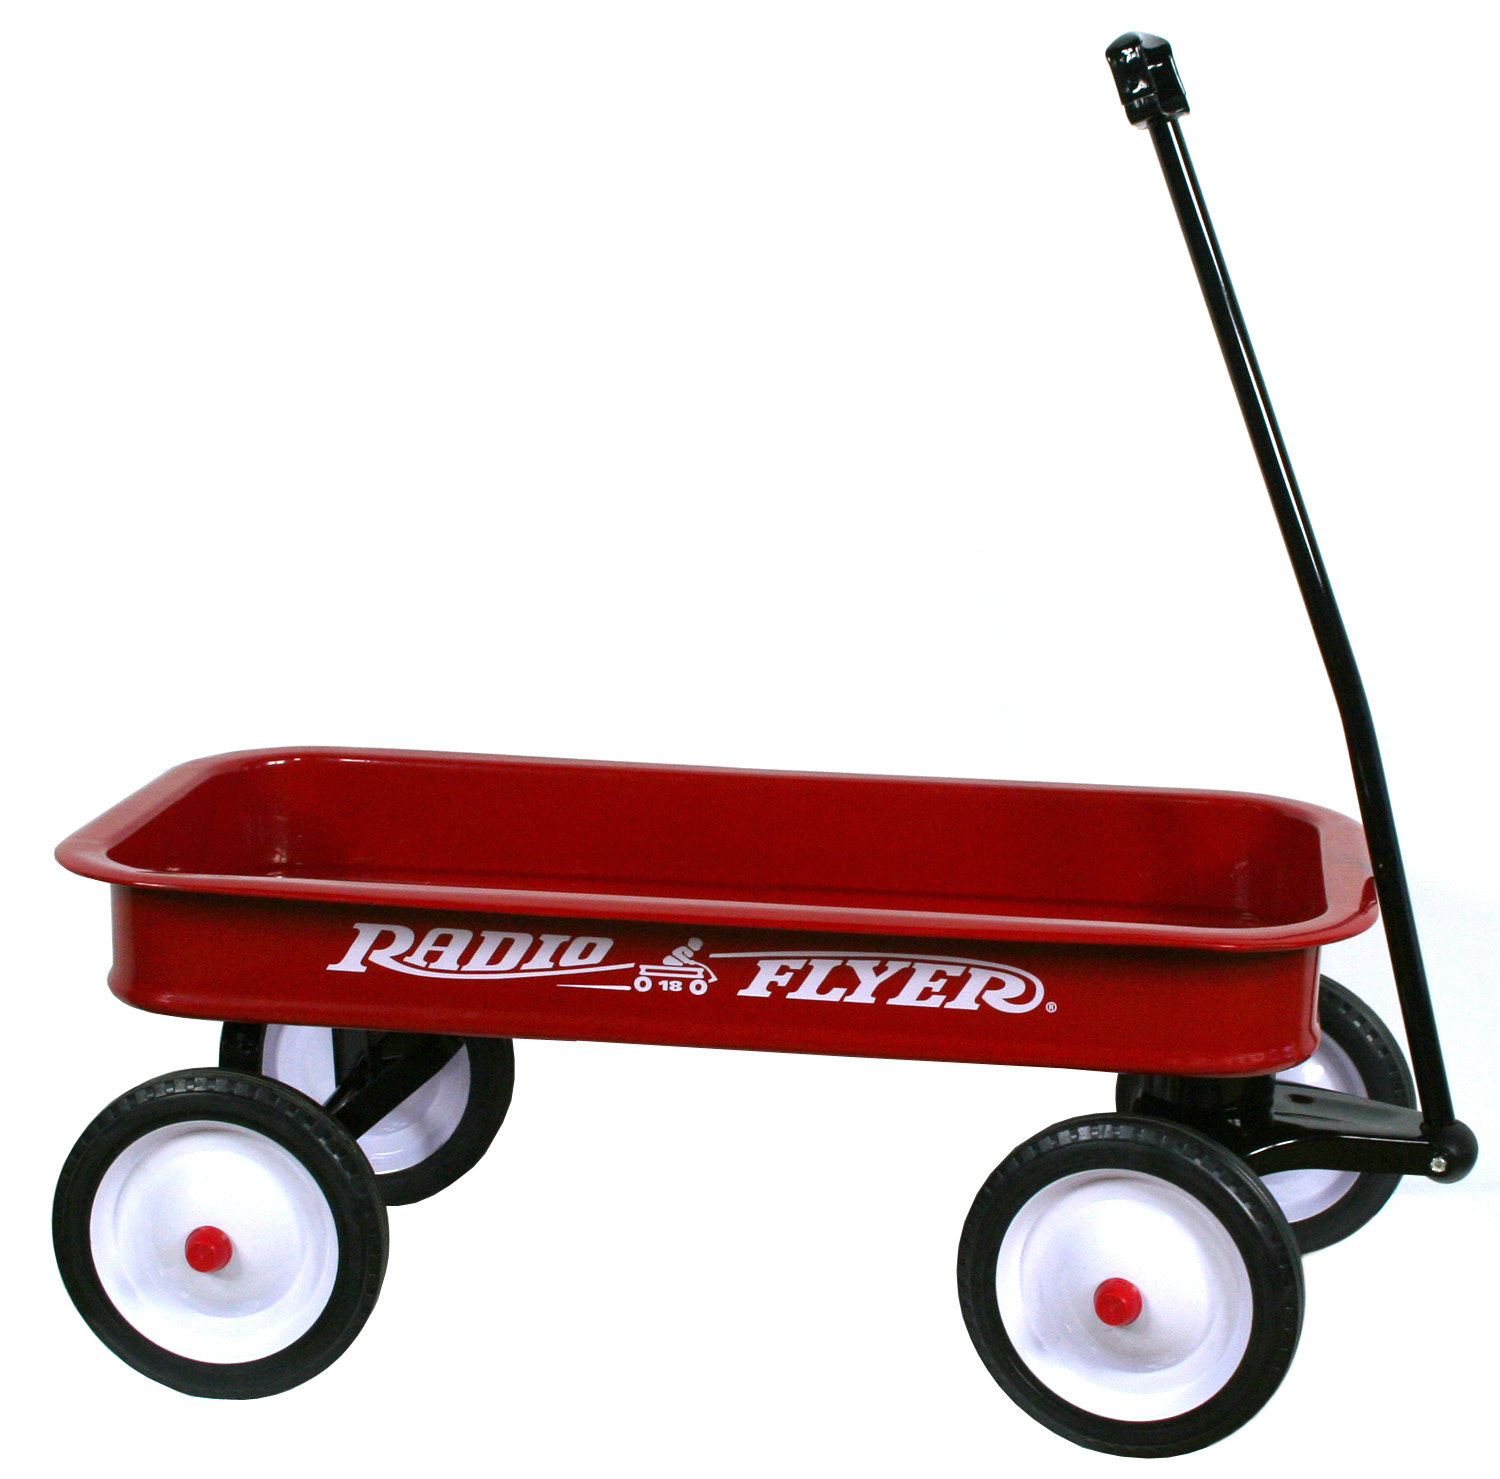 Red Wagon Pictures   Clipart Best